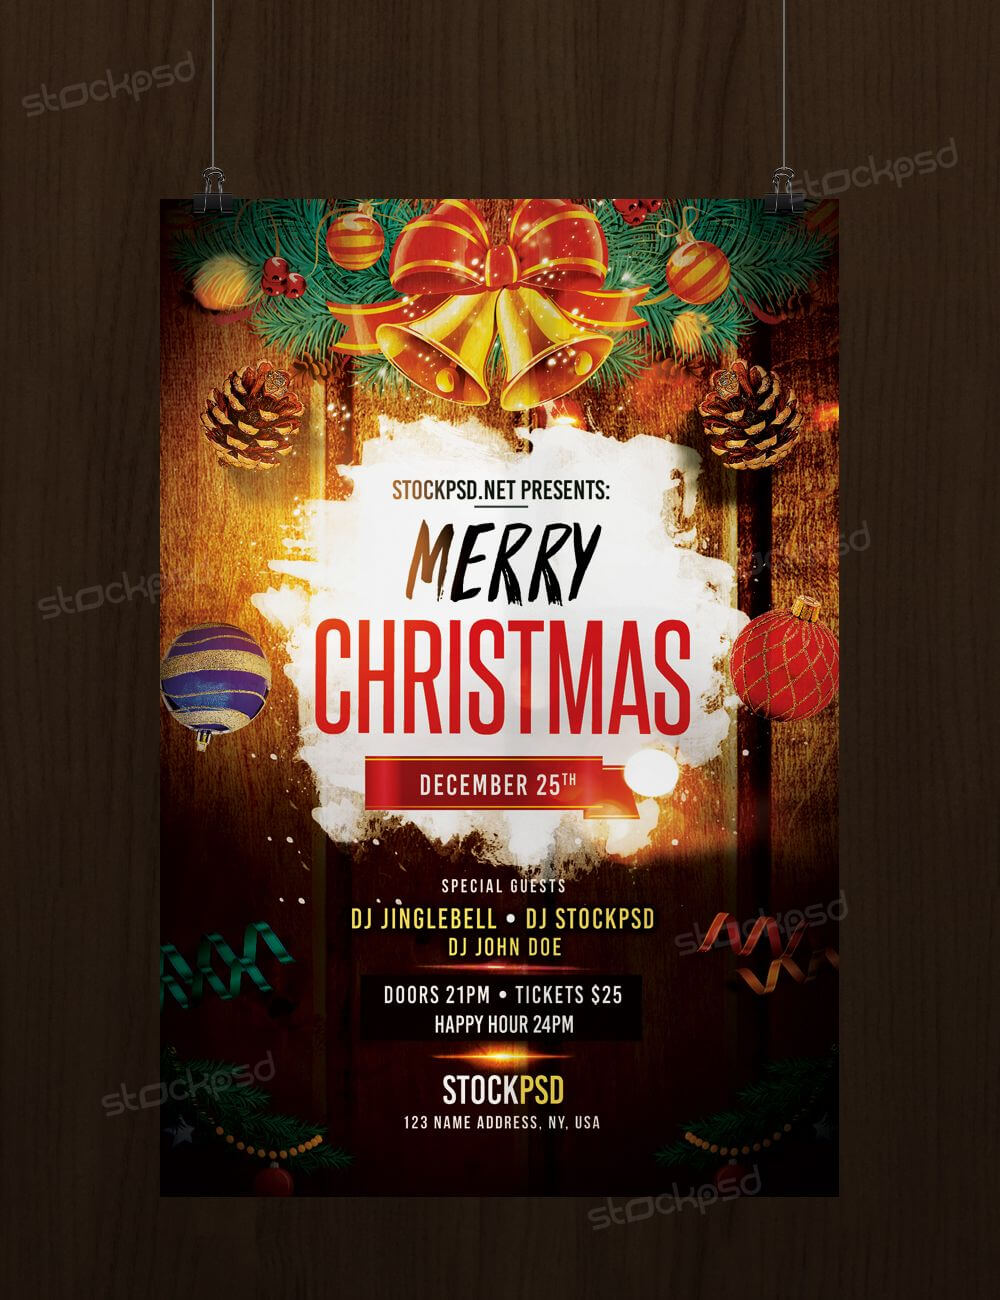 Merry Christmas – Free Psd Flyer Template | Free Psd Flyer With Regard To Christmas Brochure Templates Free